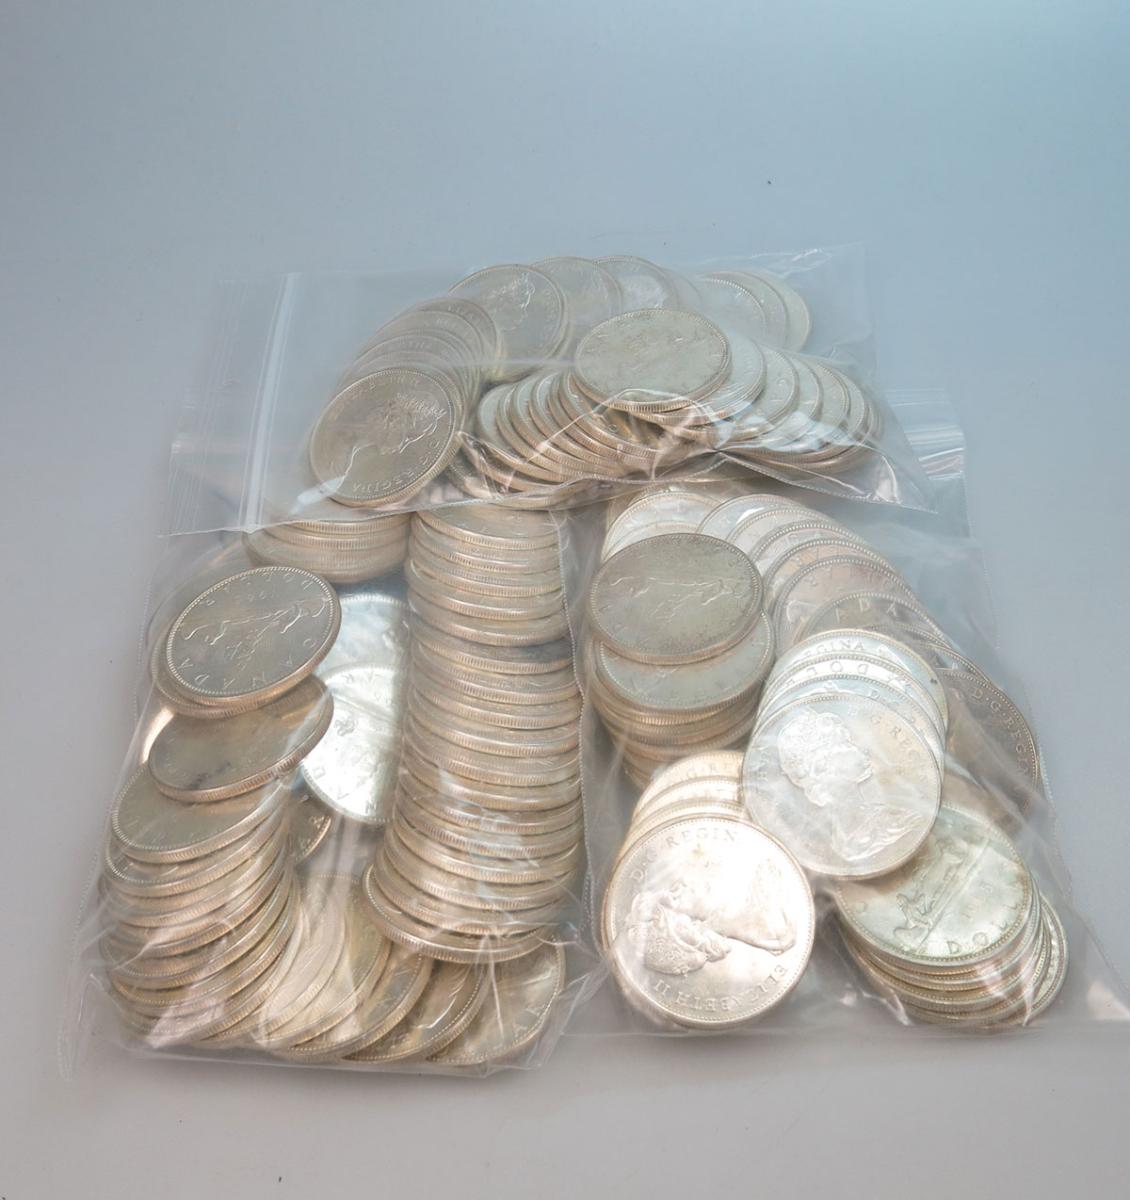 125 Canadian Silver Dollars